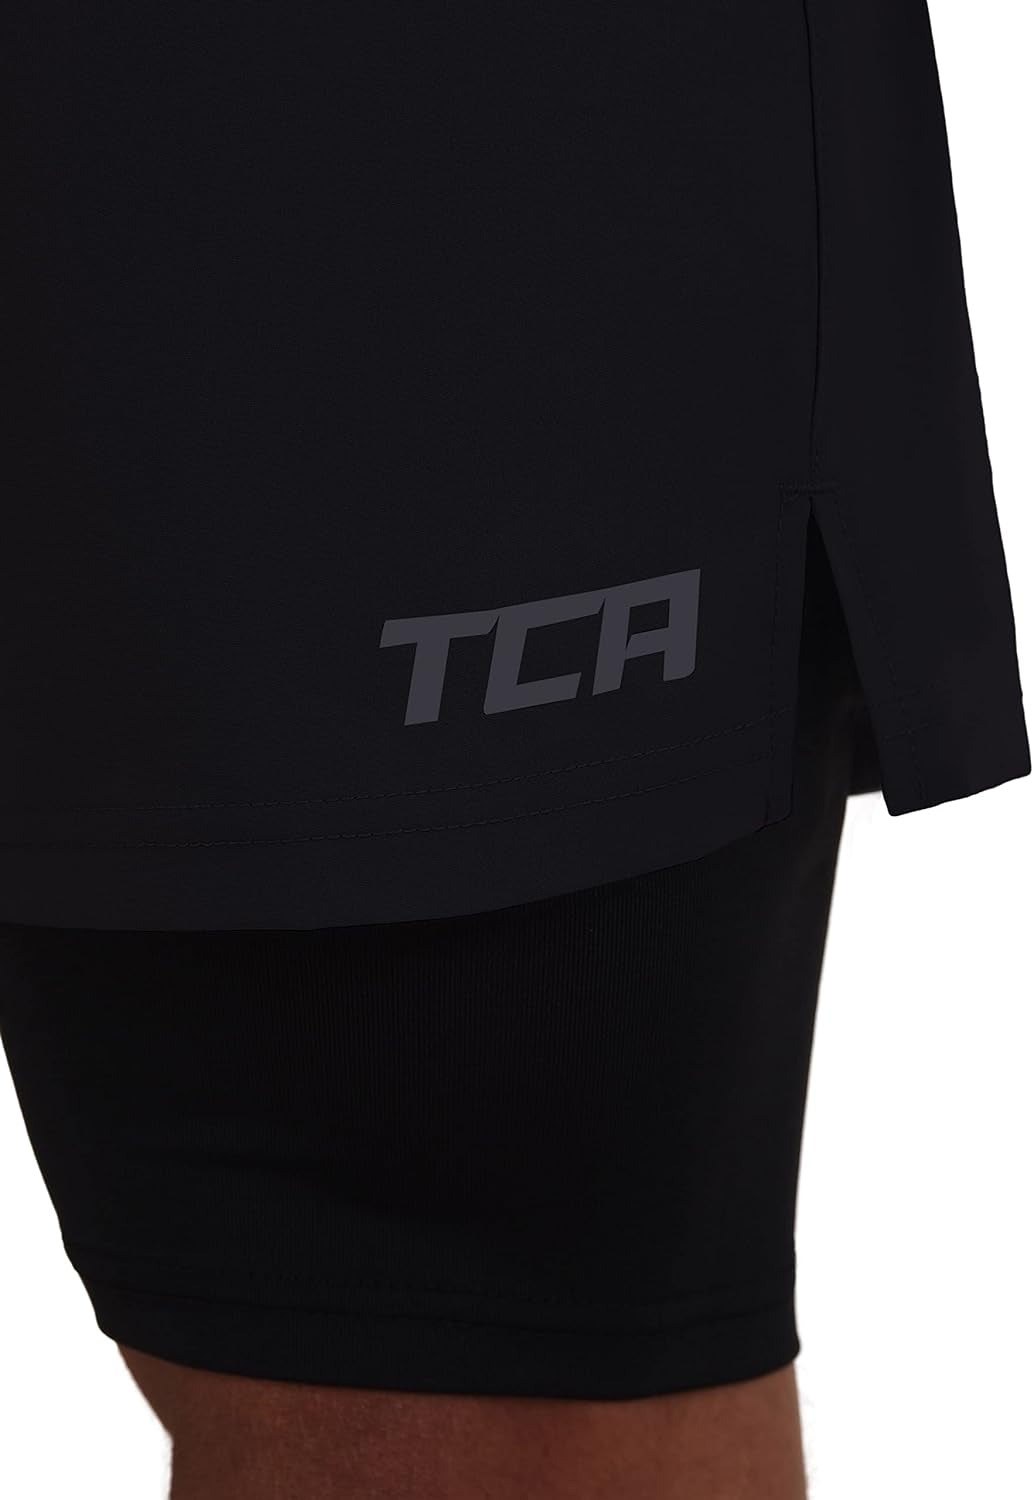 Men'S Ultra 2 in 1 Running Shorts with Inner Compression Short and Zip Pocket